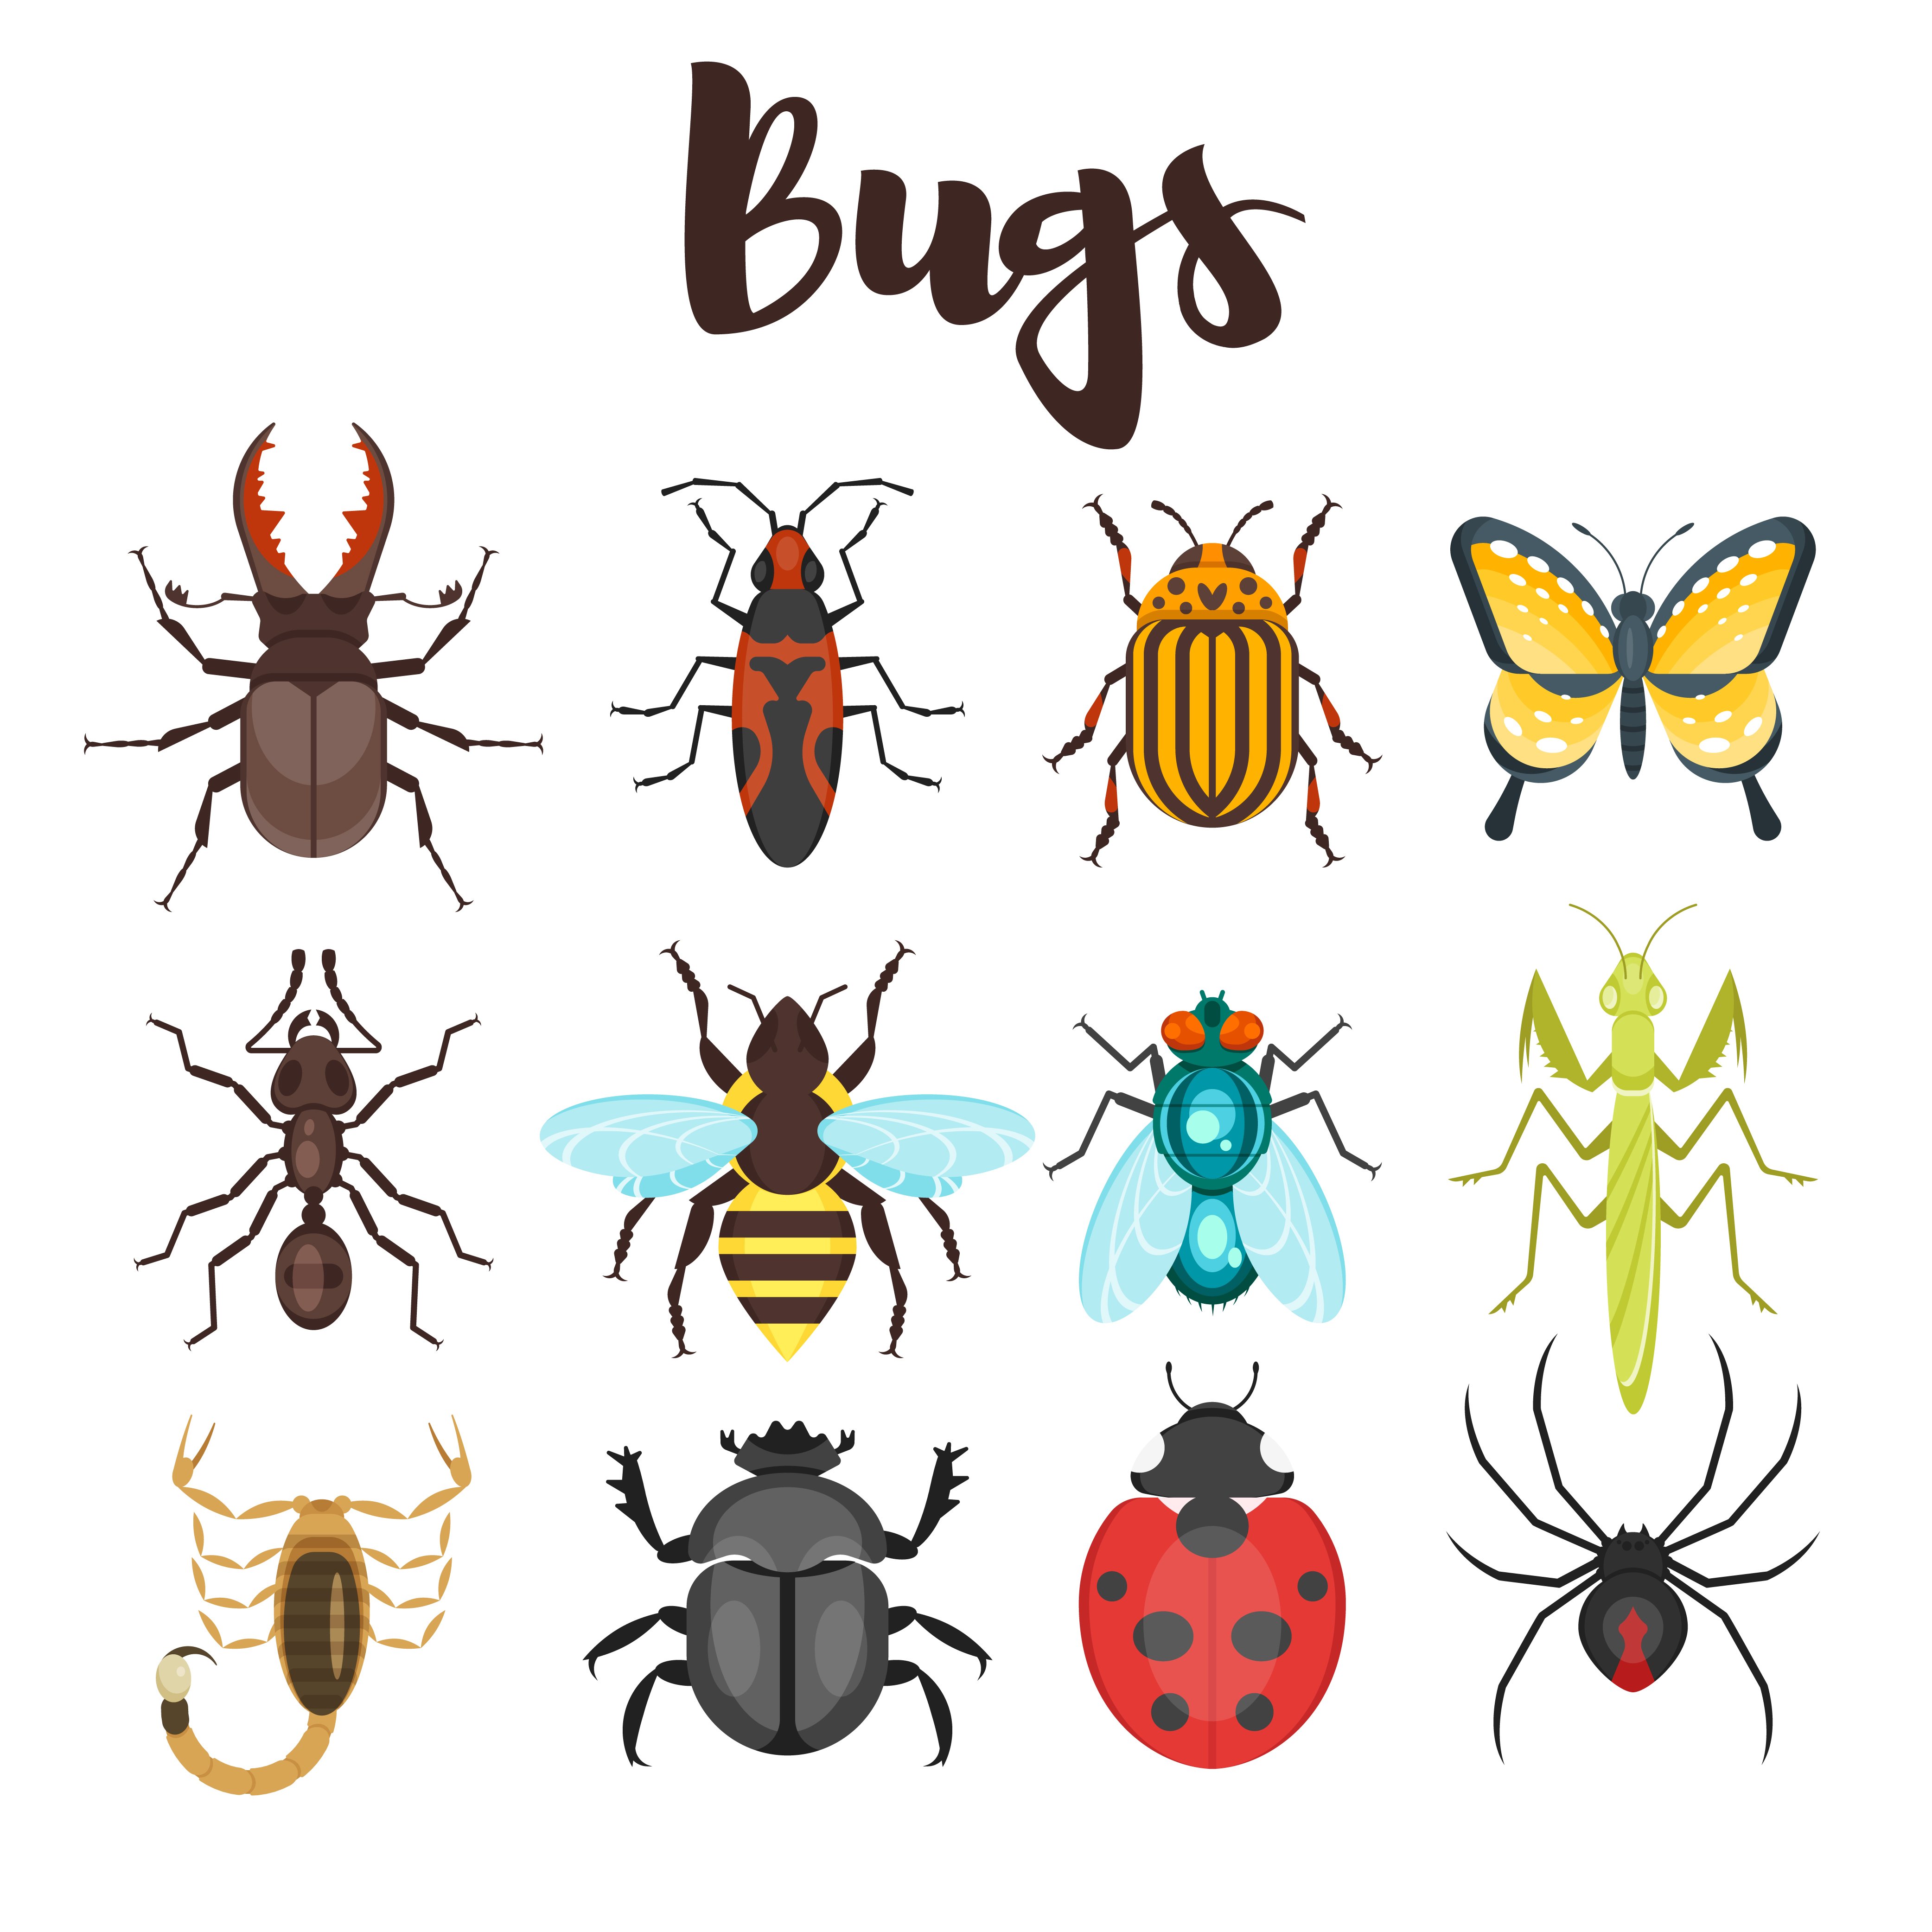 Bugs! preview image.